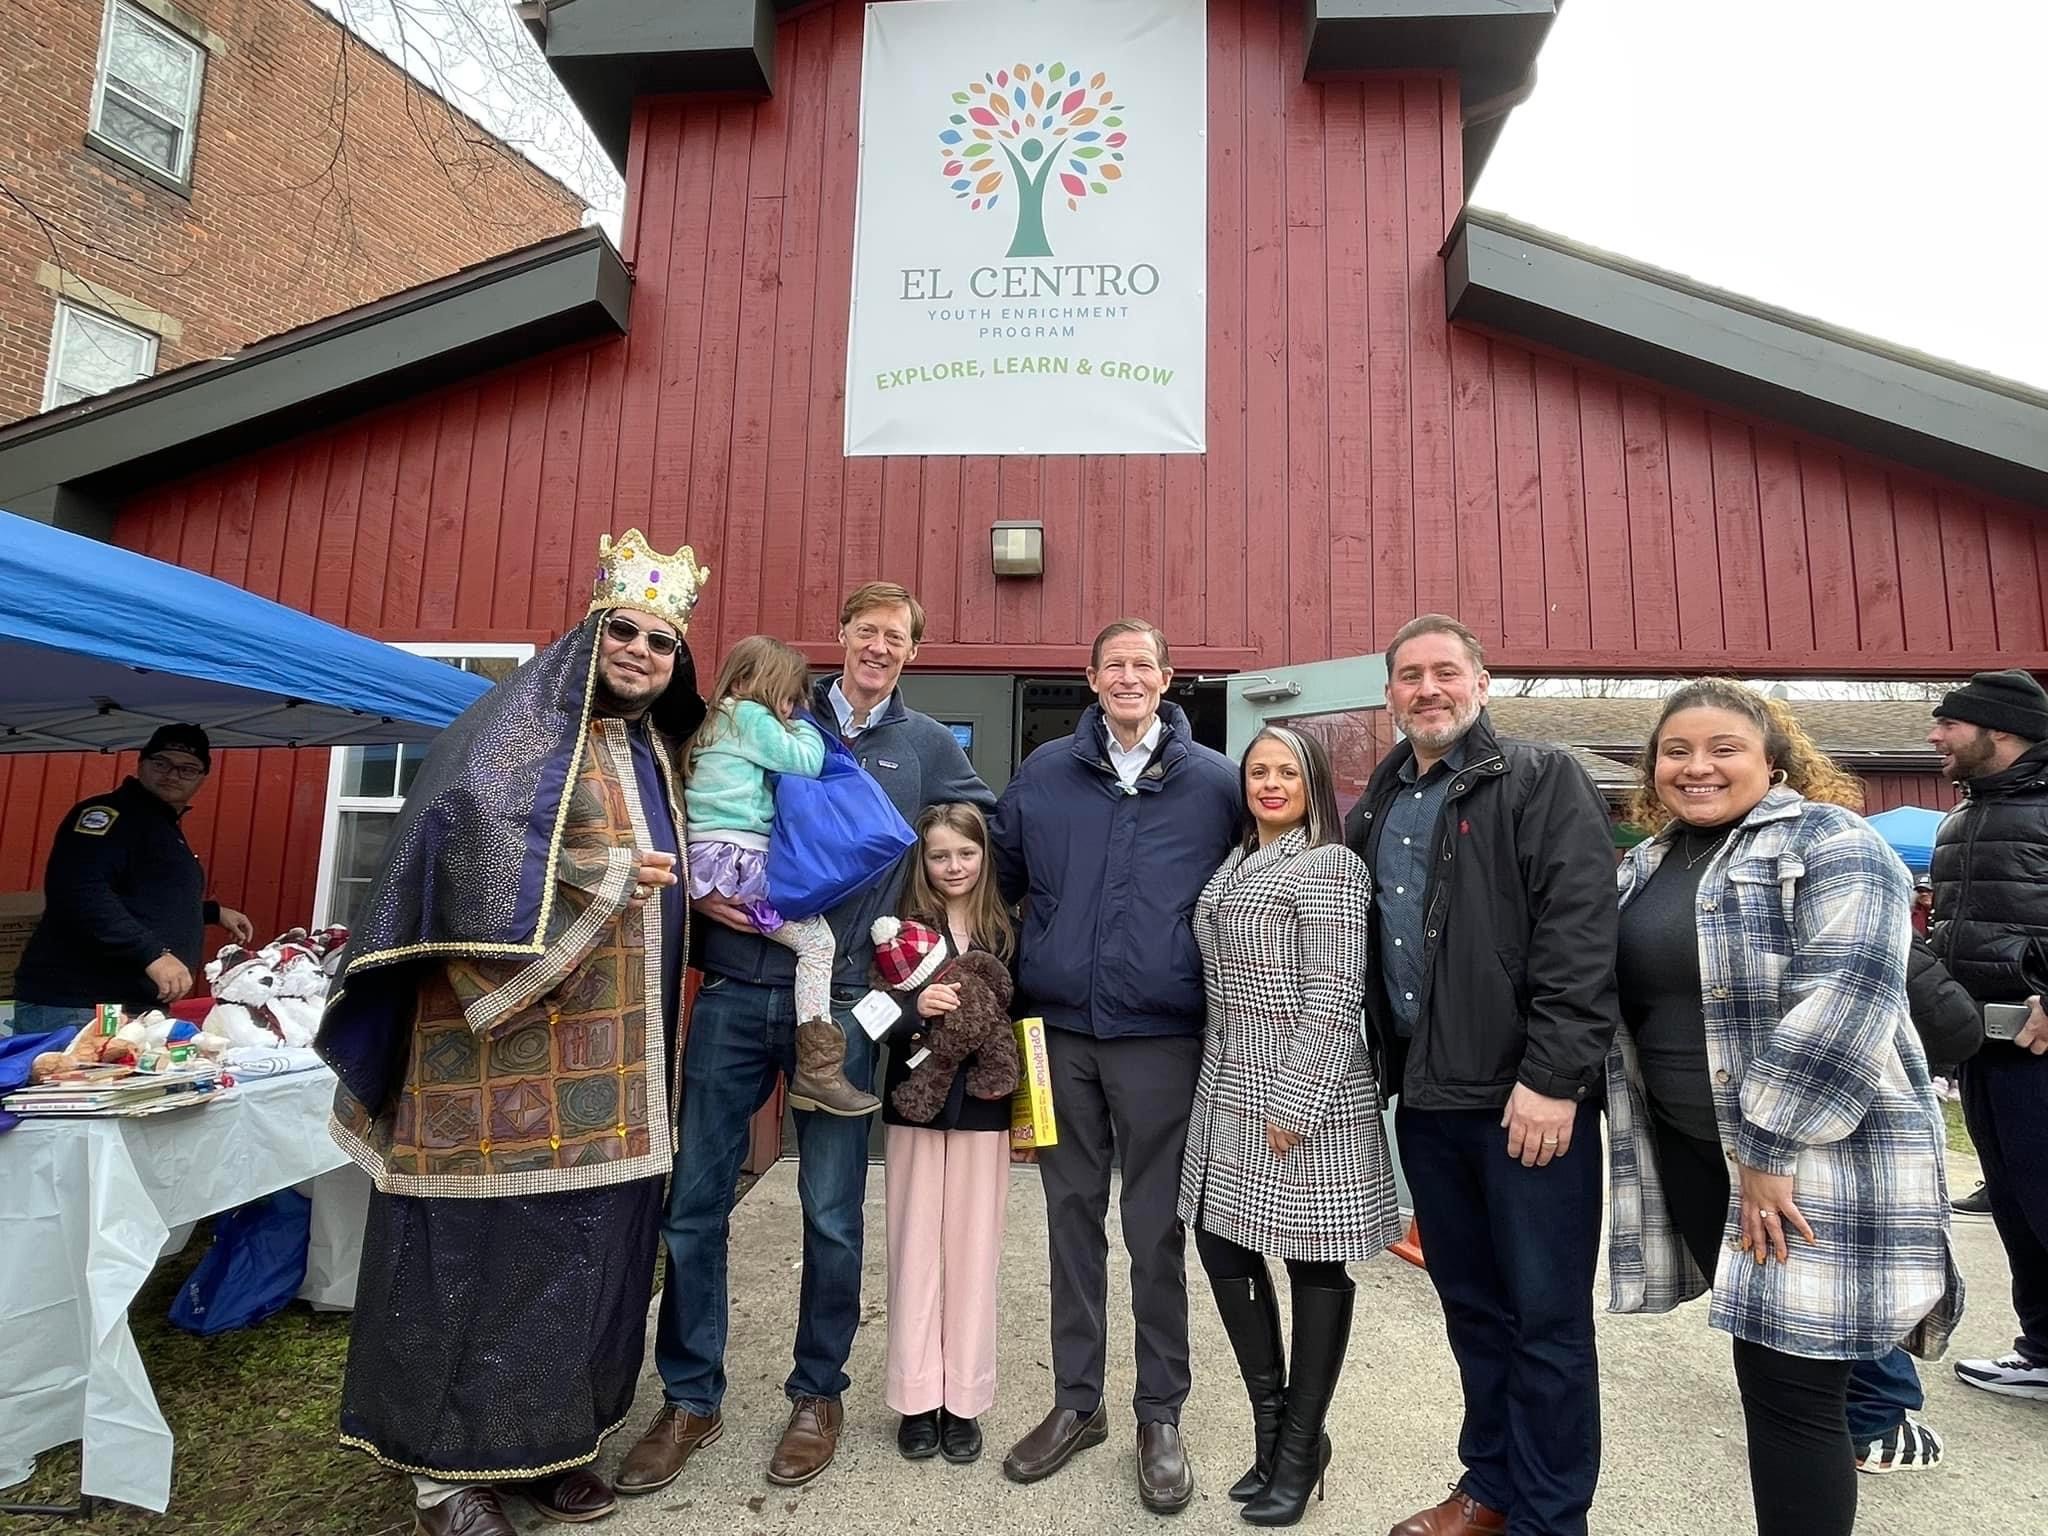 Blumenthal joined the 3 Kings Celebration in New Haven.